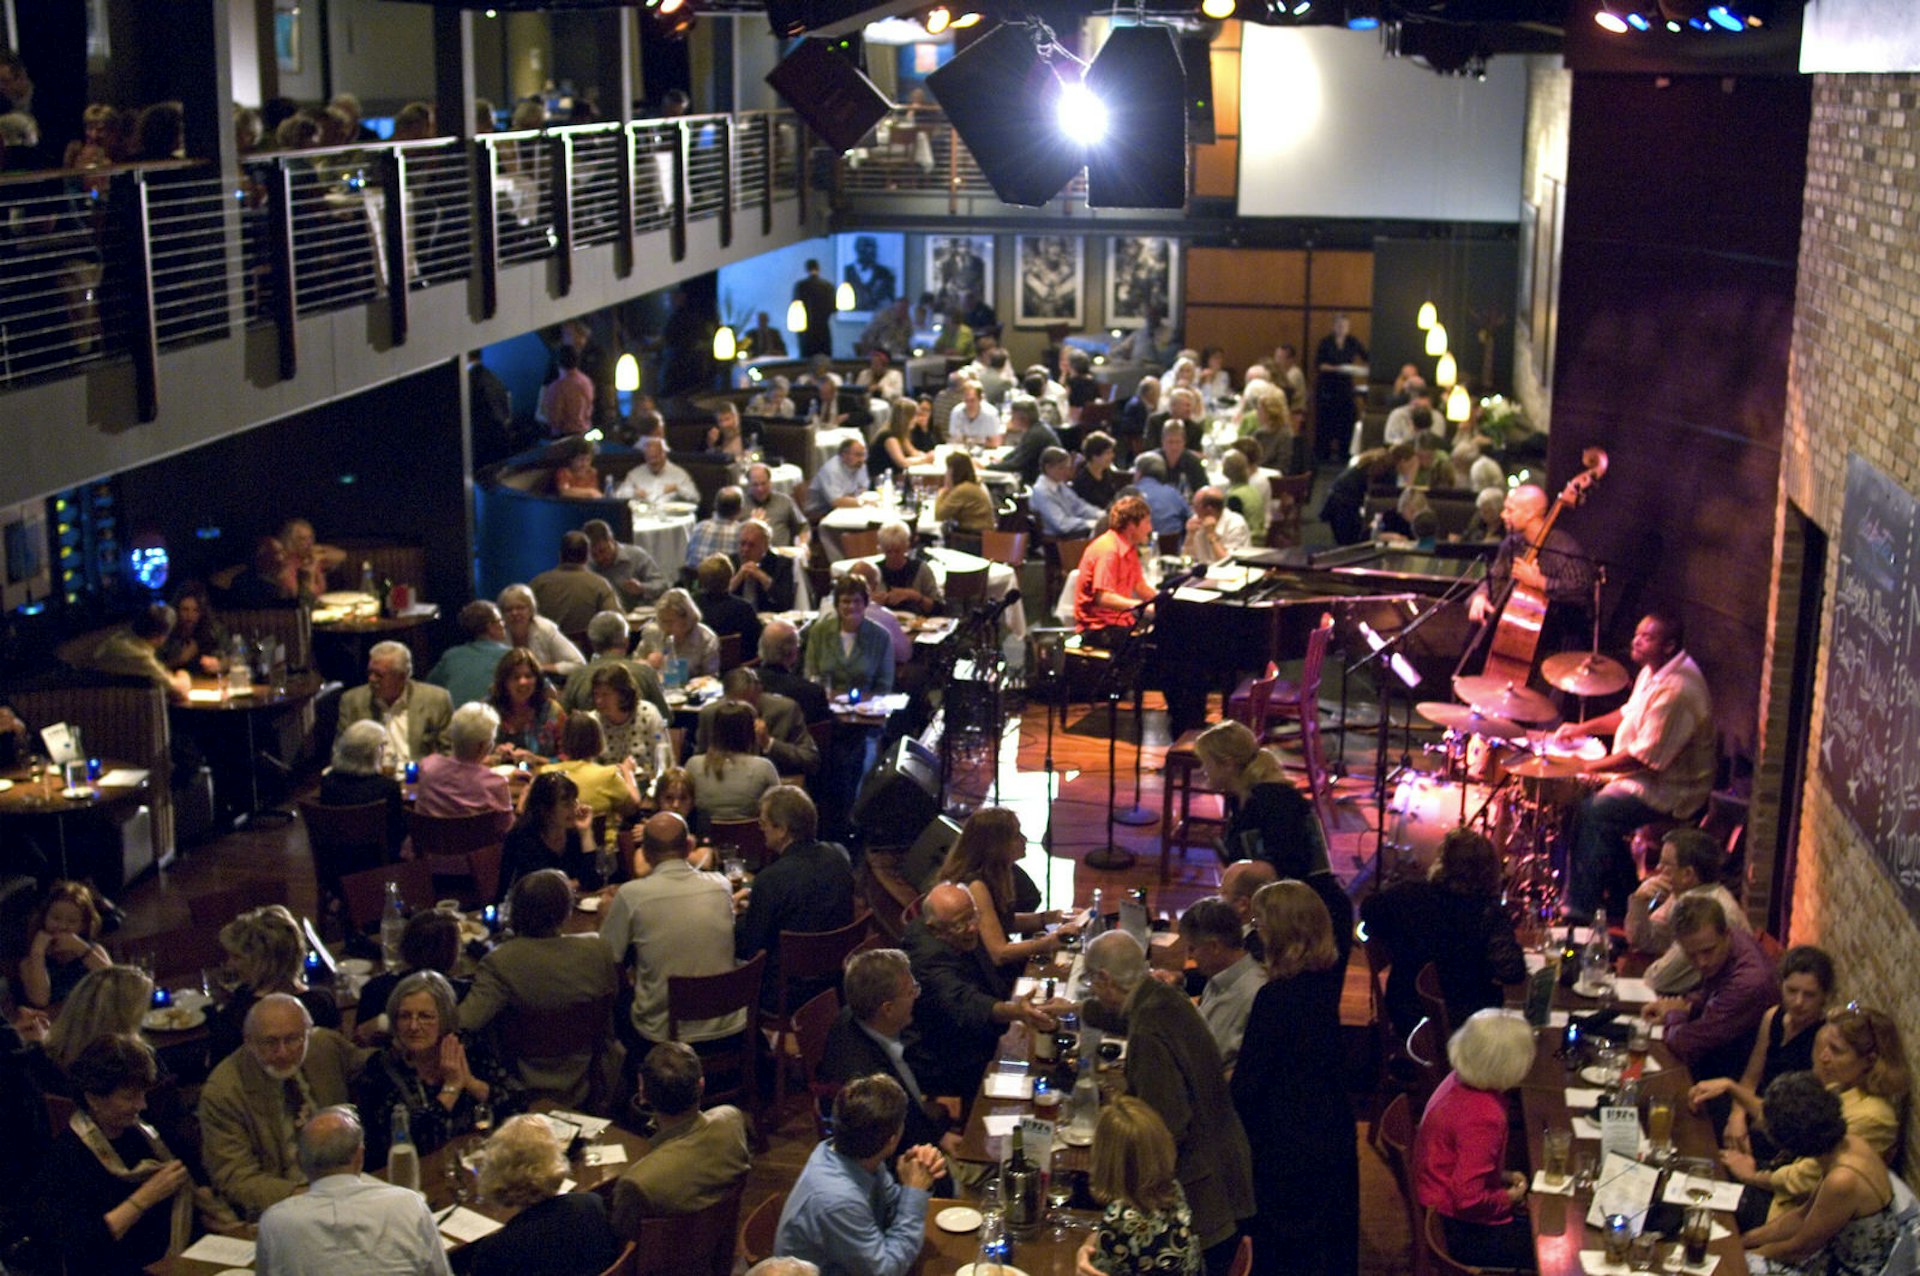 Interior of the Dakota Jazz Club and Restaurant, which is packed with people sitting at tables while a live band plays on an elevated stage